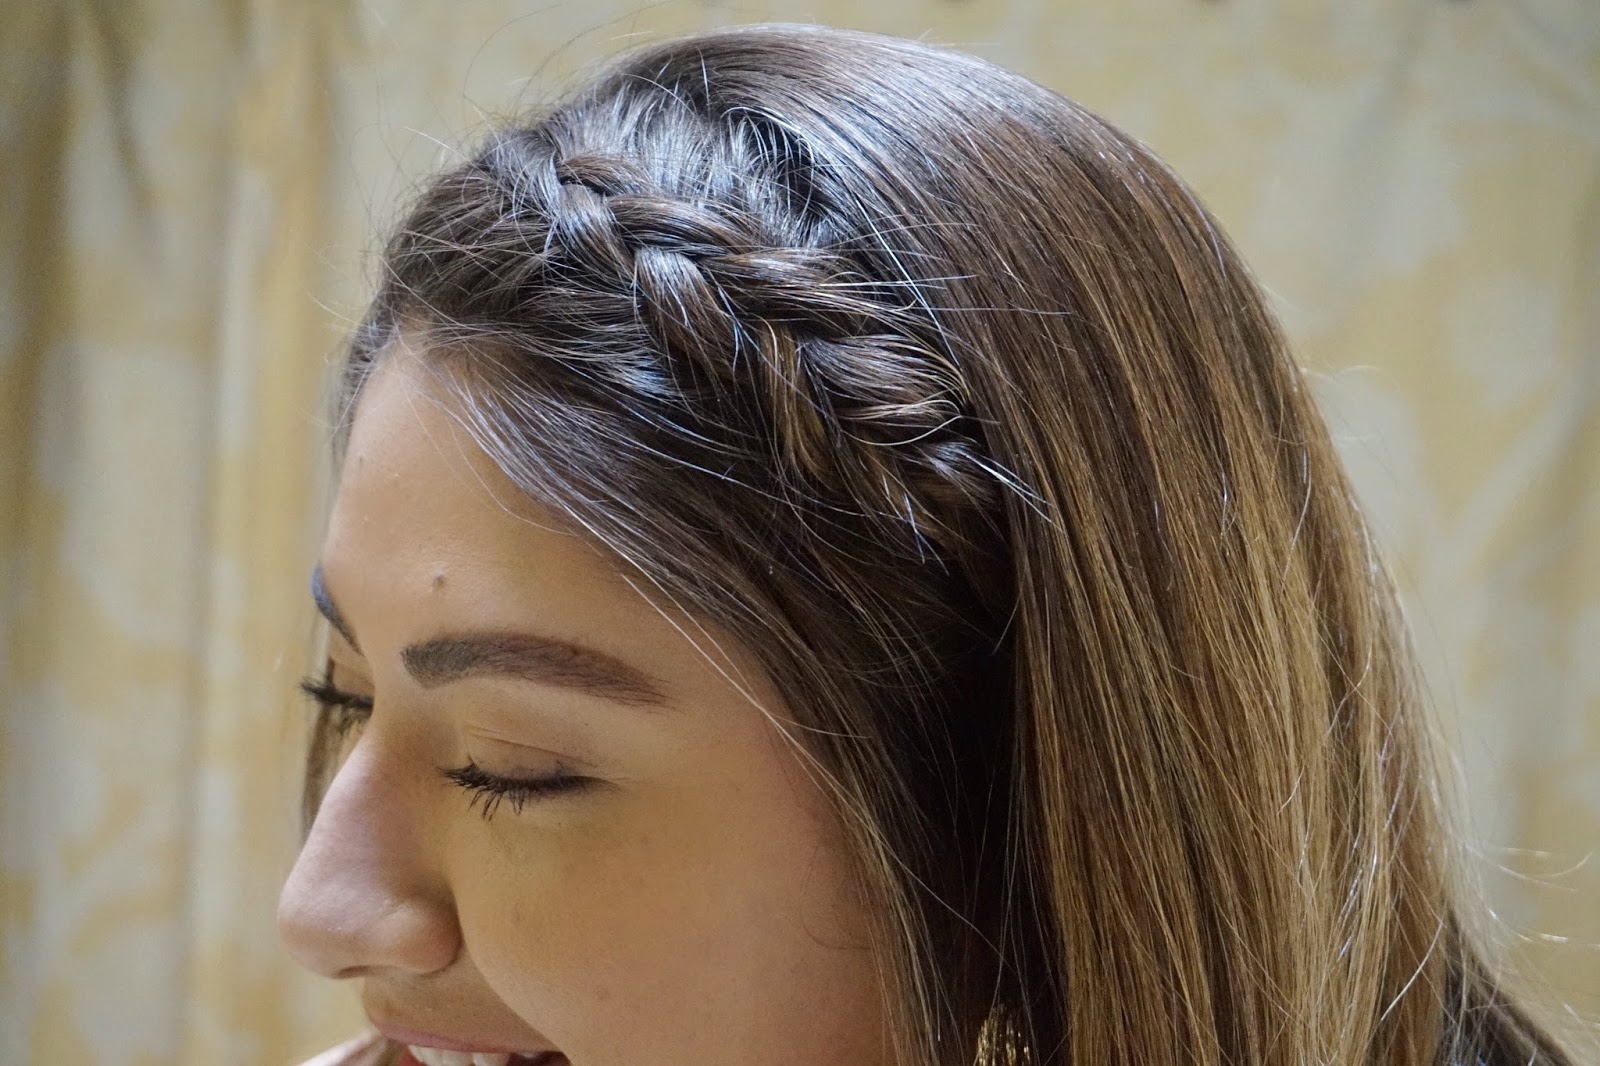 Easy Hairstyle for Dirty Hair // Second Day Hair // Easy Summer Hairstyles | beautywithlily.com